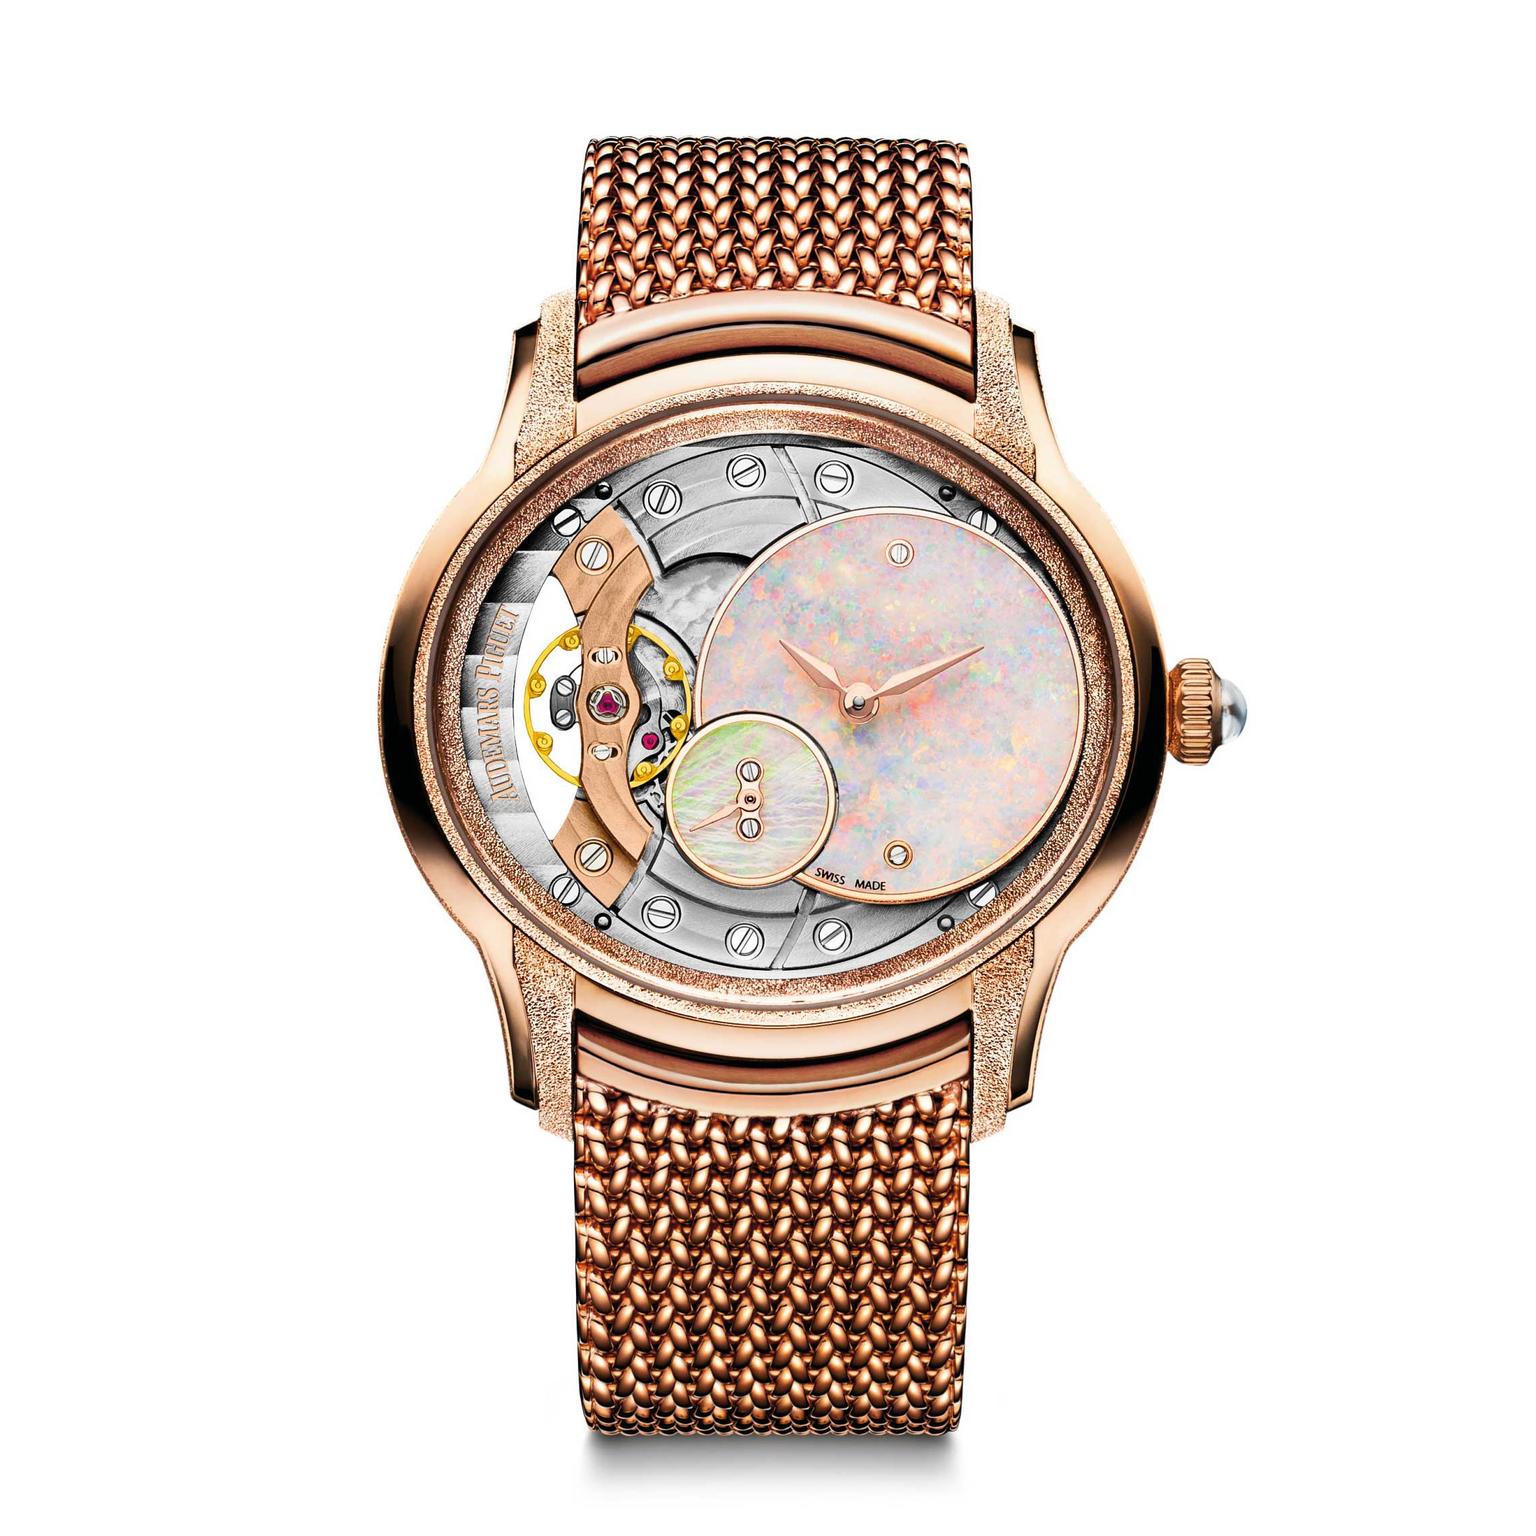 Audemars Piguet Millenary pink gold ladies' watch features an opal dial and exposed workings of the hand-wound calibre. 